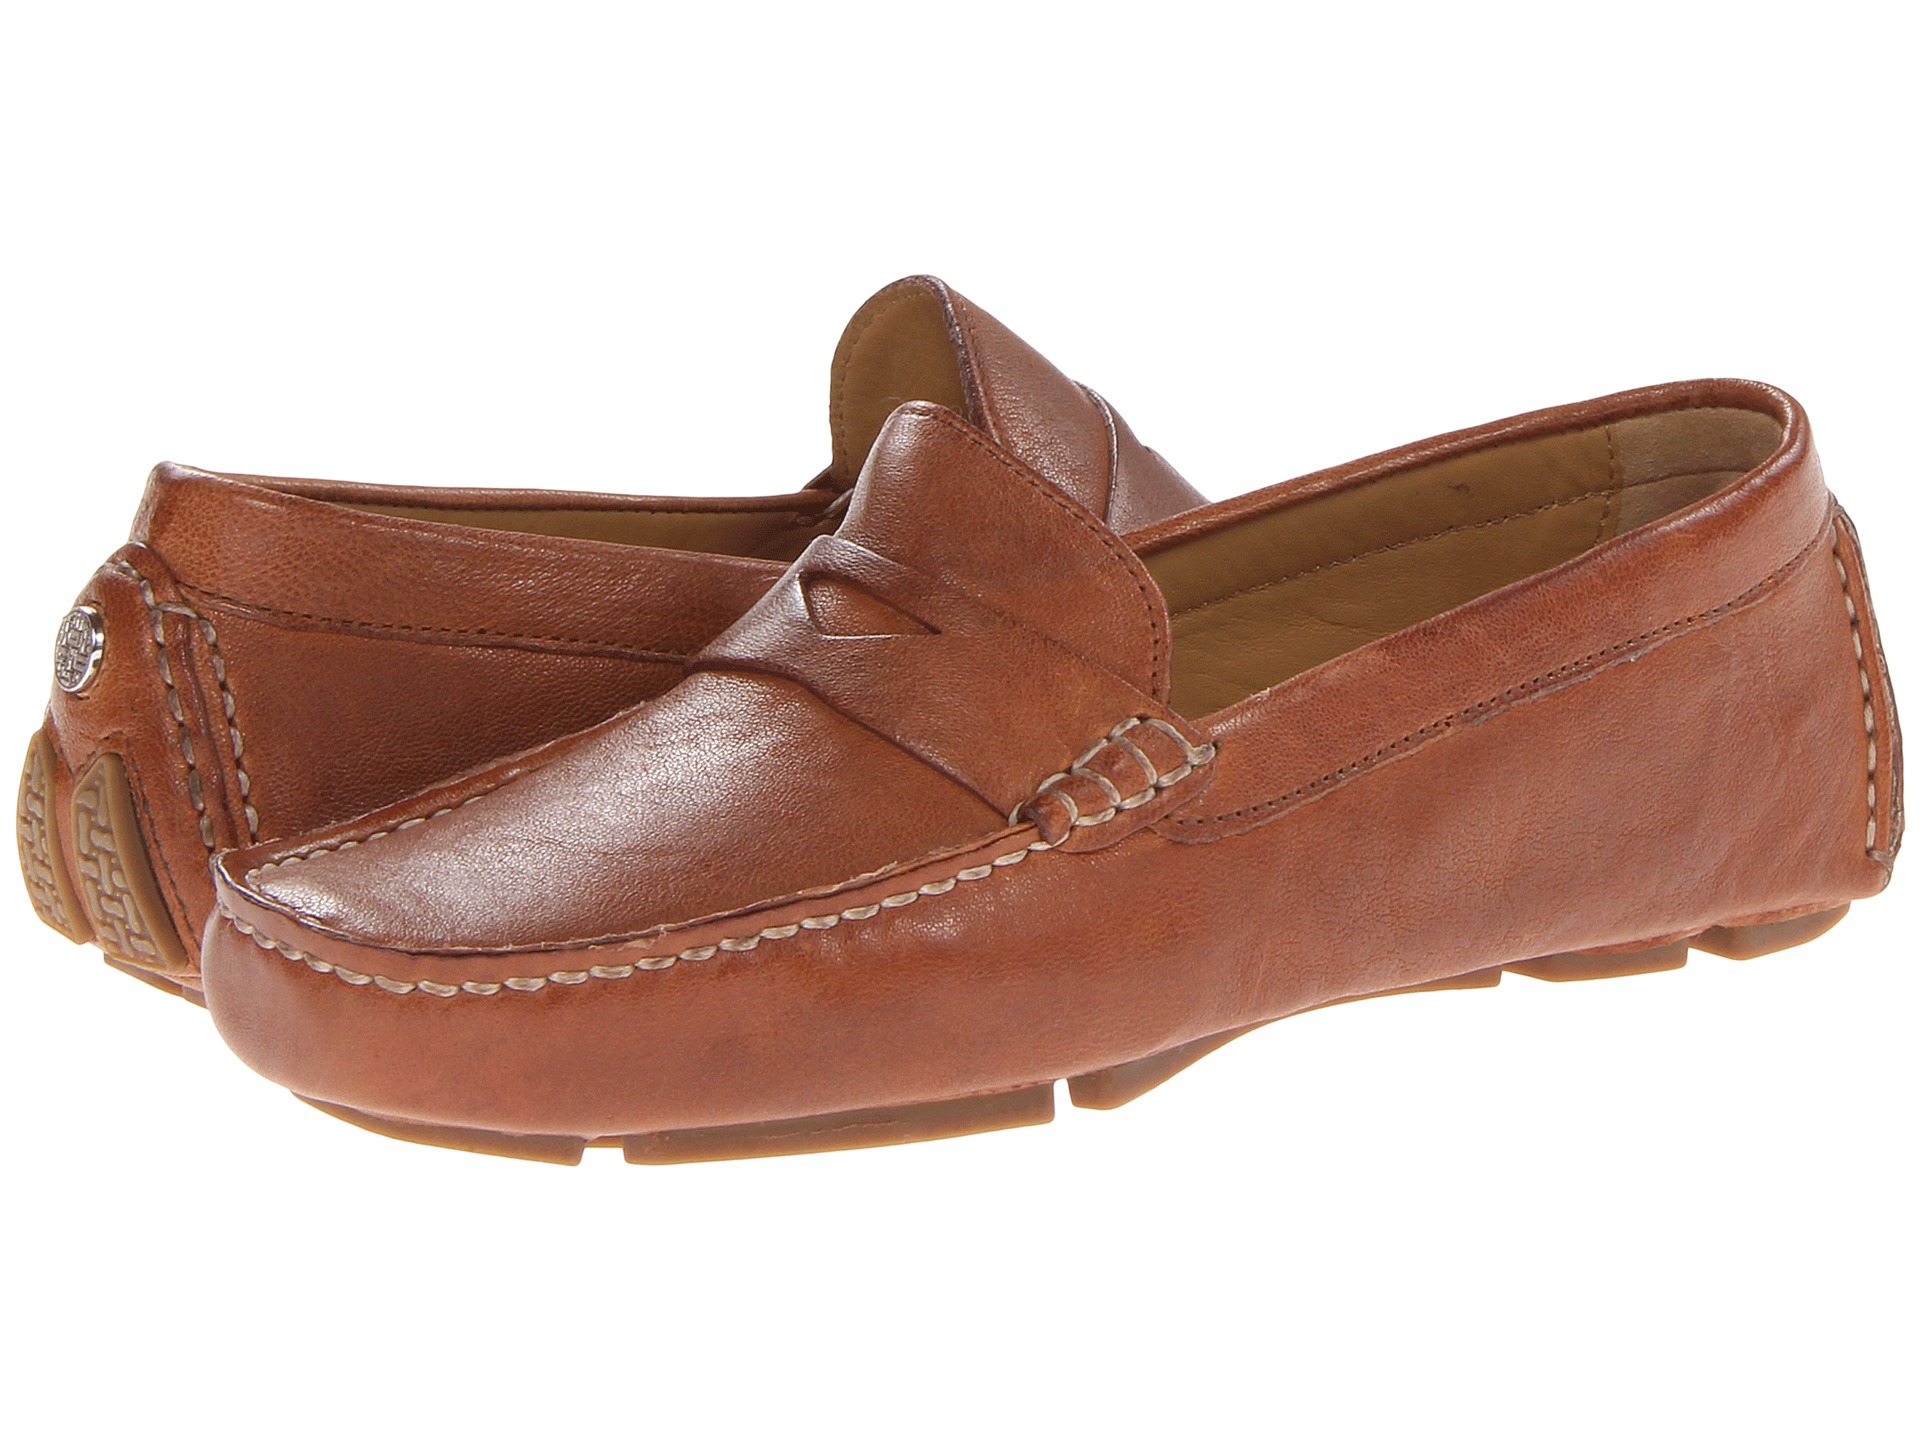 Cole Haan Trillby Driver - Zappos.com Free Shipping BOTH Ways